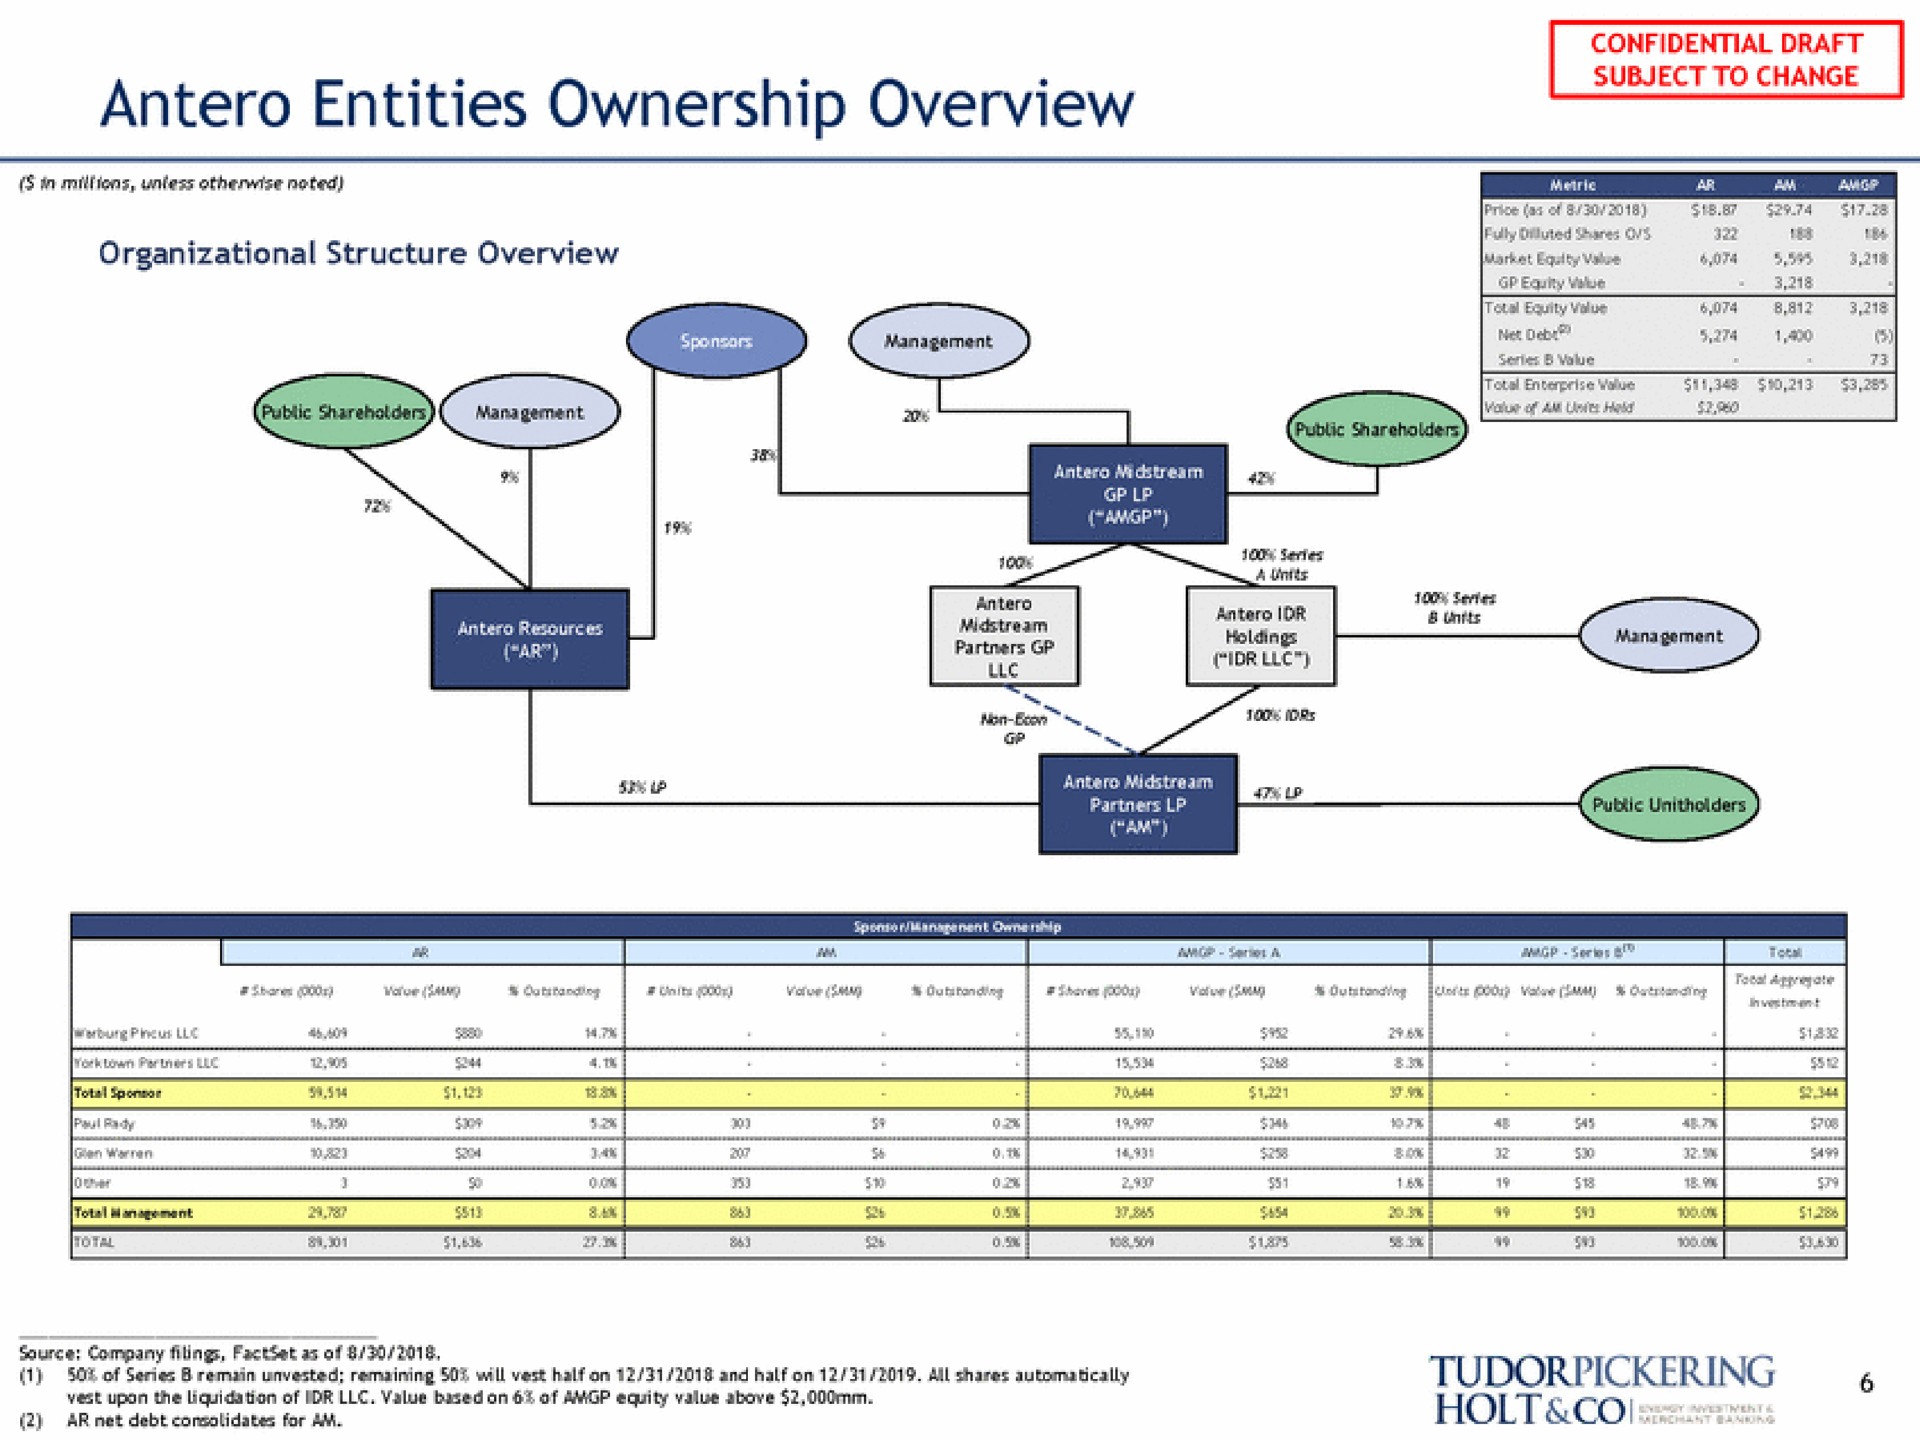 entities ownership overview a tin sare ase sices tee | Tudor, Pickering, Holt & Co